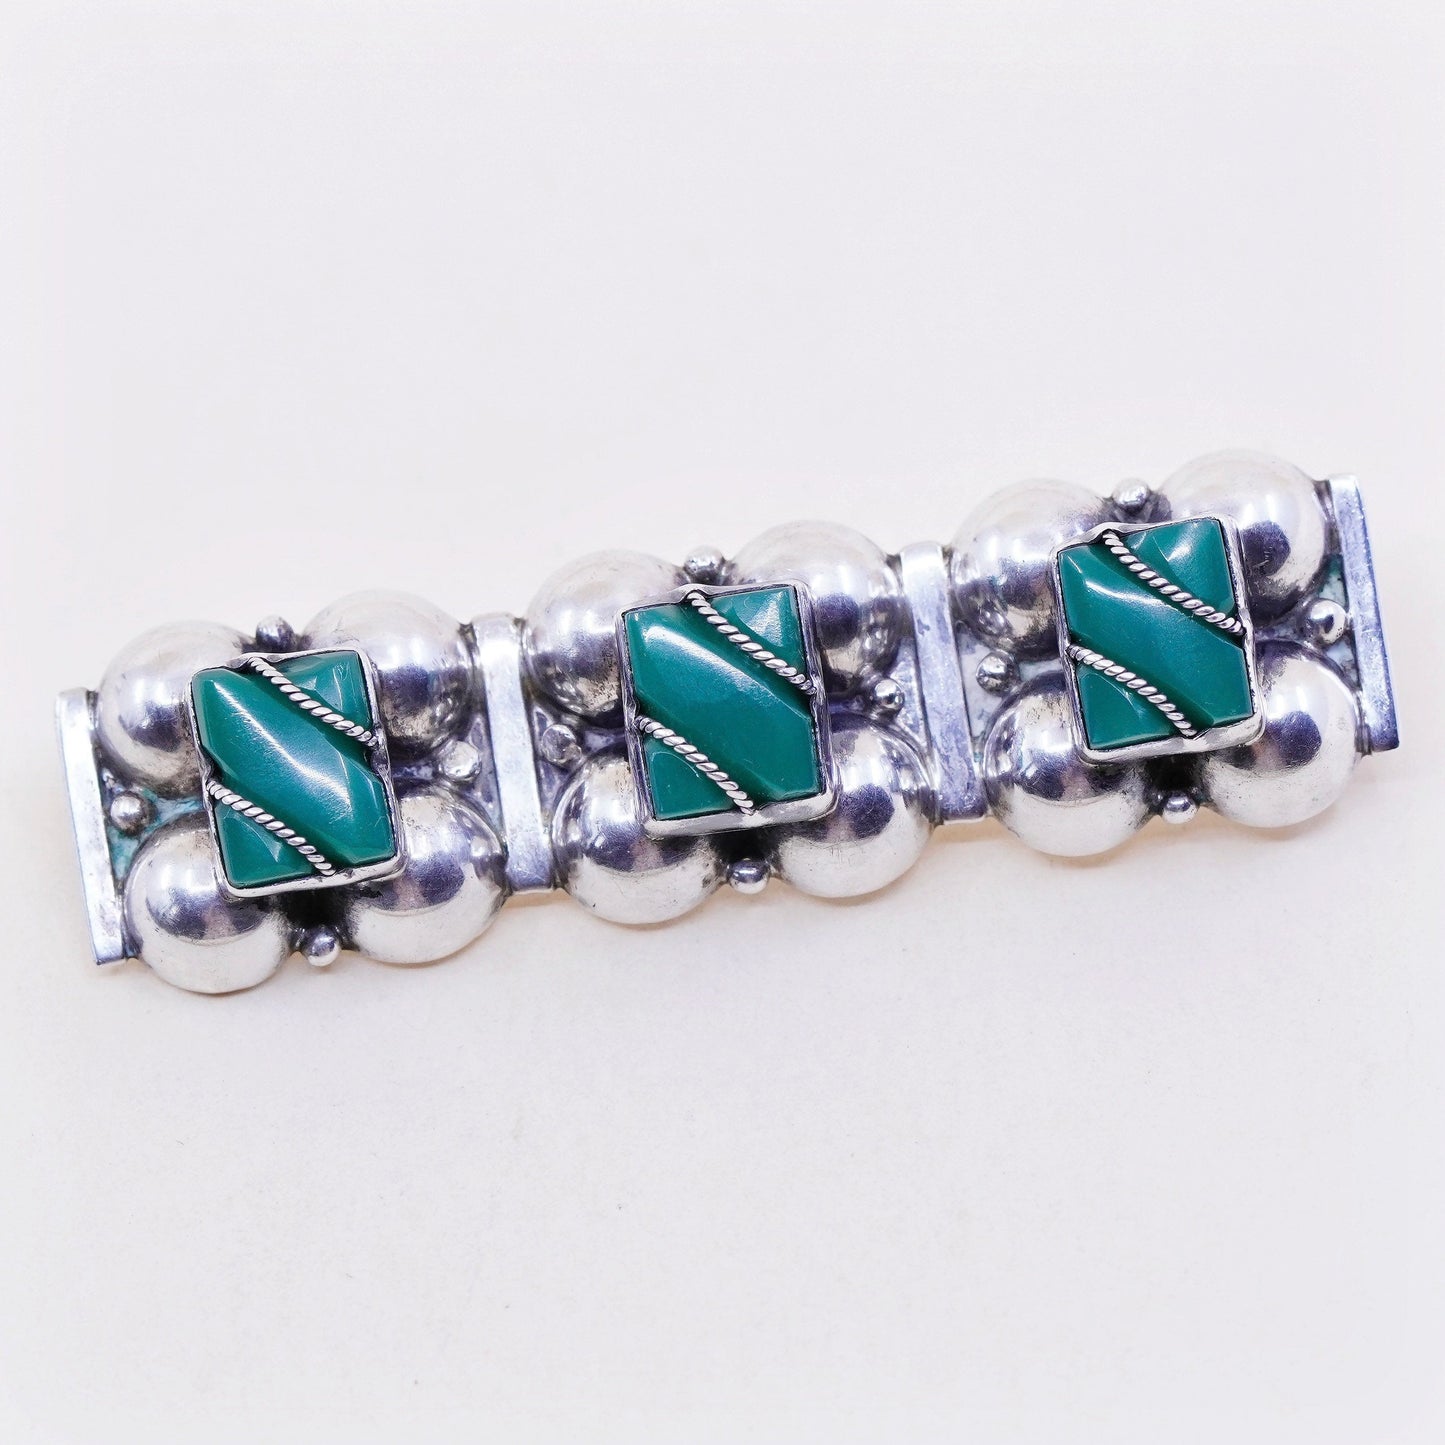 Vintage sterling silver handmade brooch, Mexico 925 pin with jade and beads